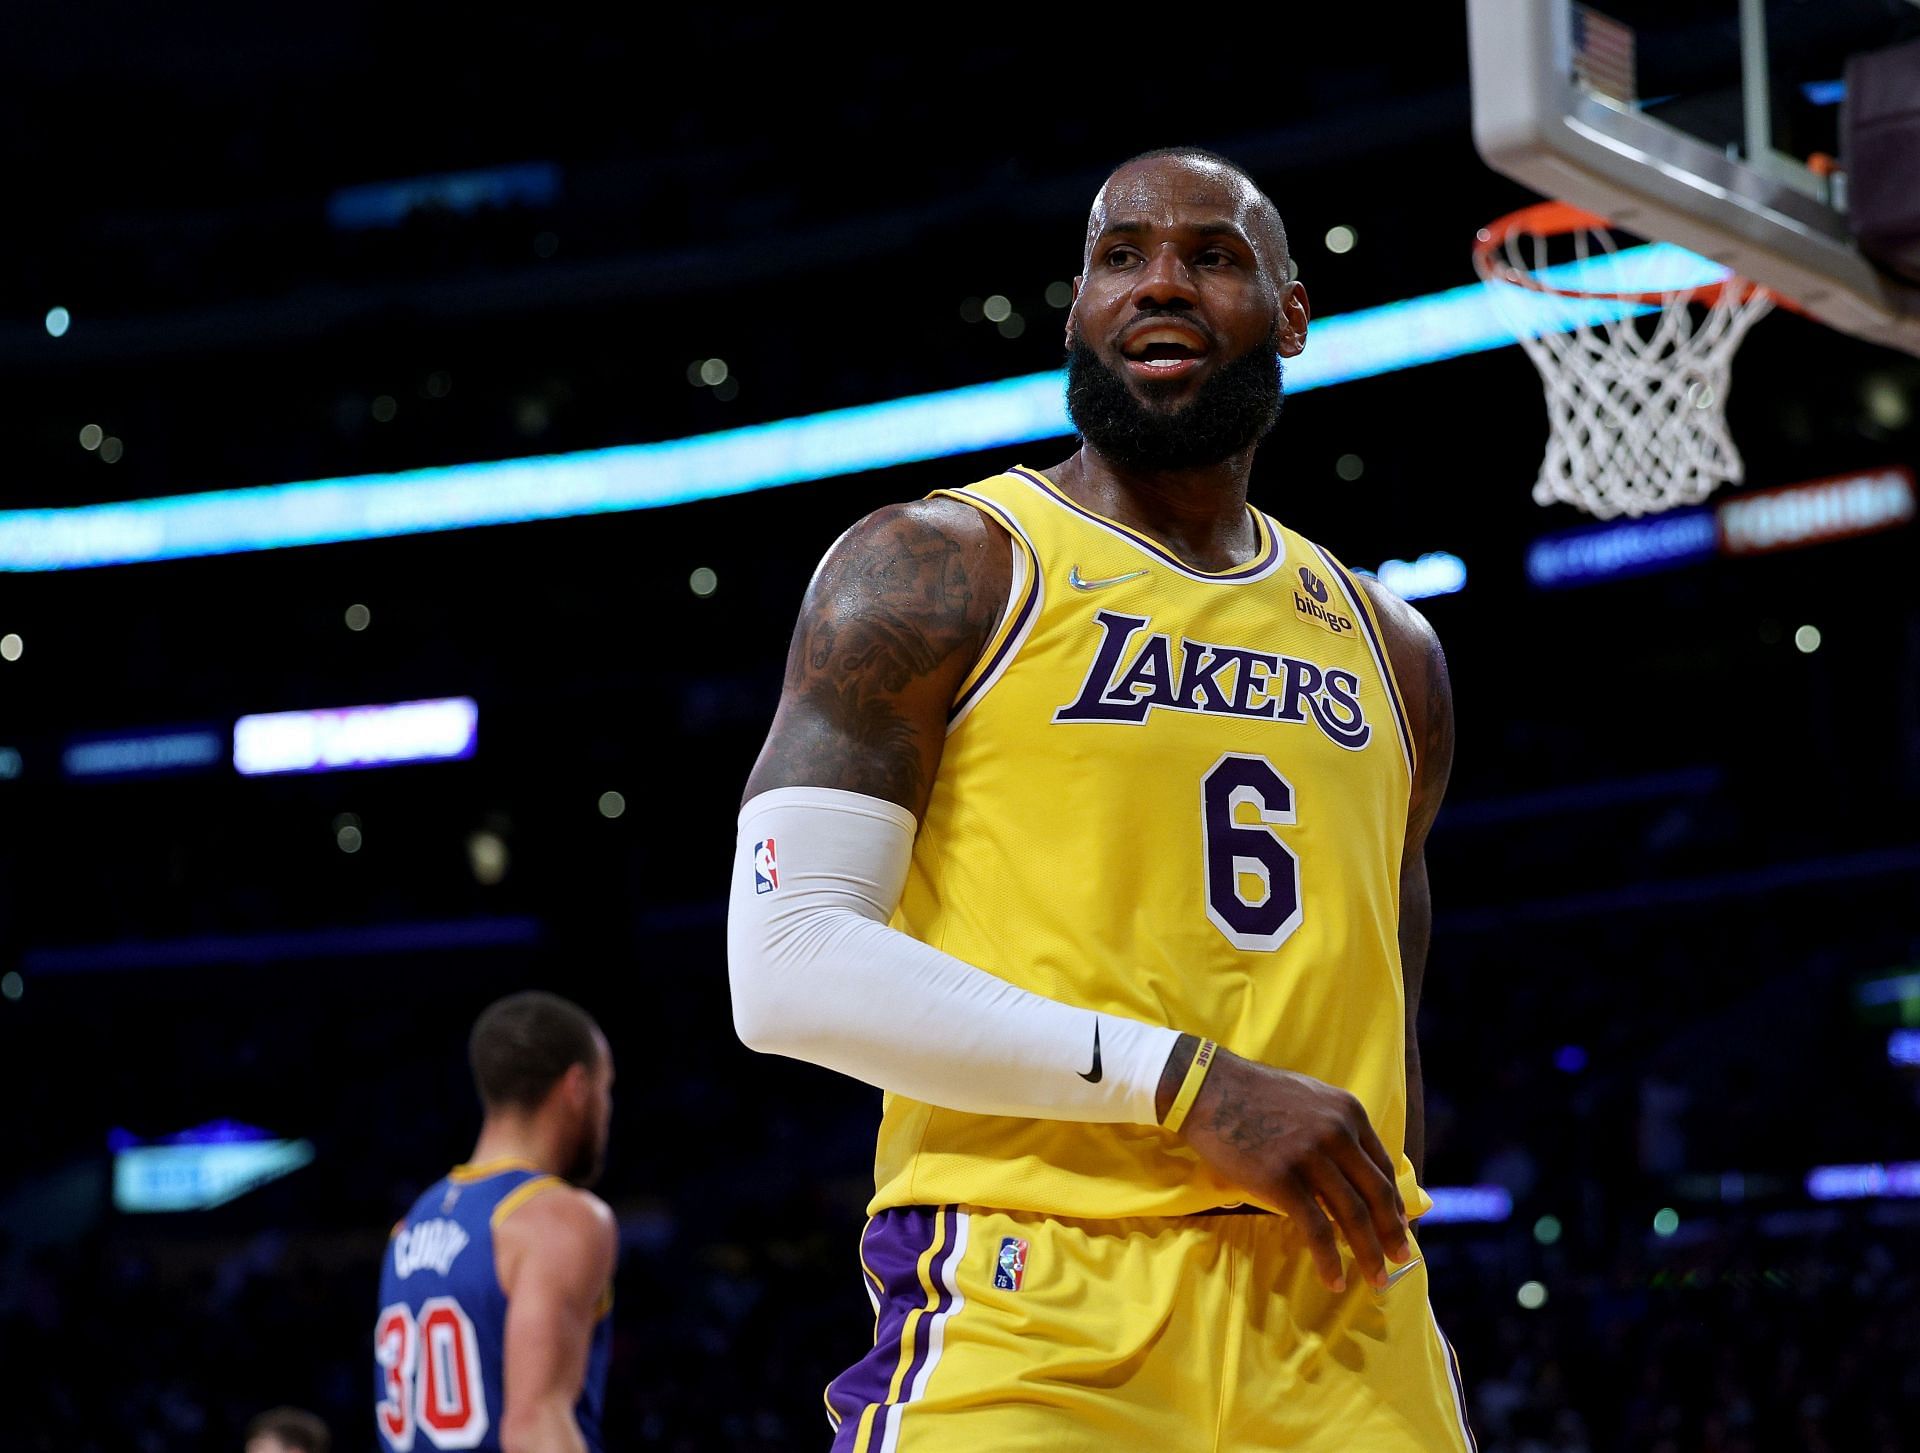 LeBron James in action during Golden State Warriors v Los Angeles Lakers game